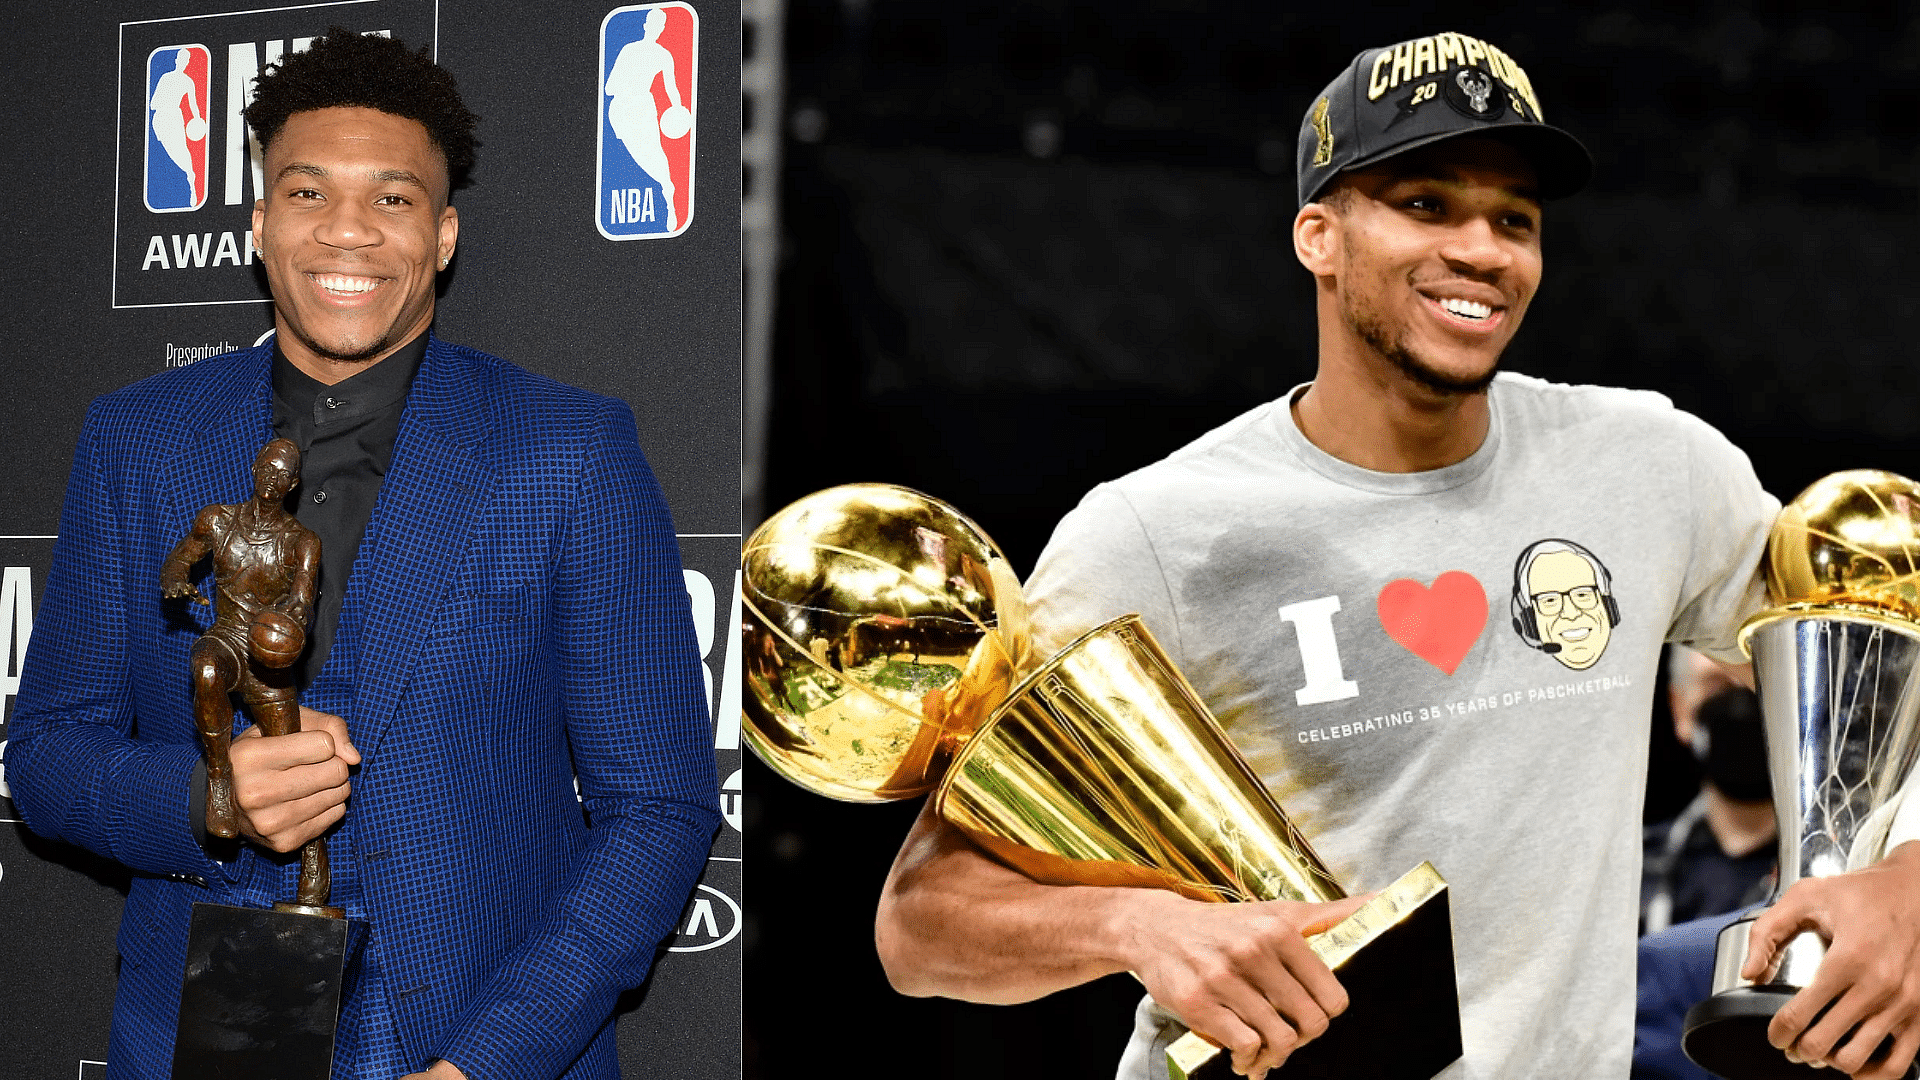 Giannis Antetokounmpo with his MVP trophy and the Larry O'Brien Championship Trophy